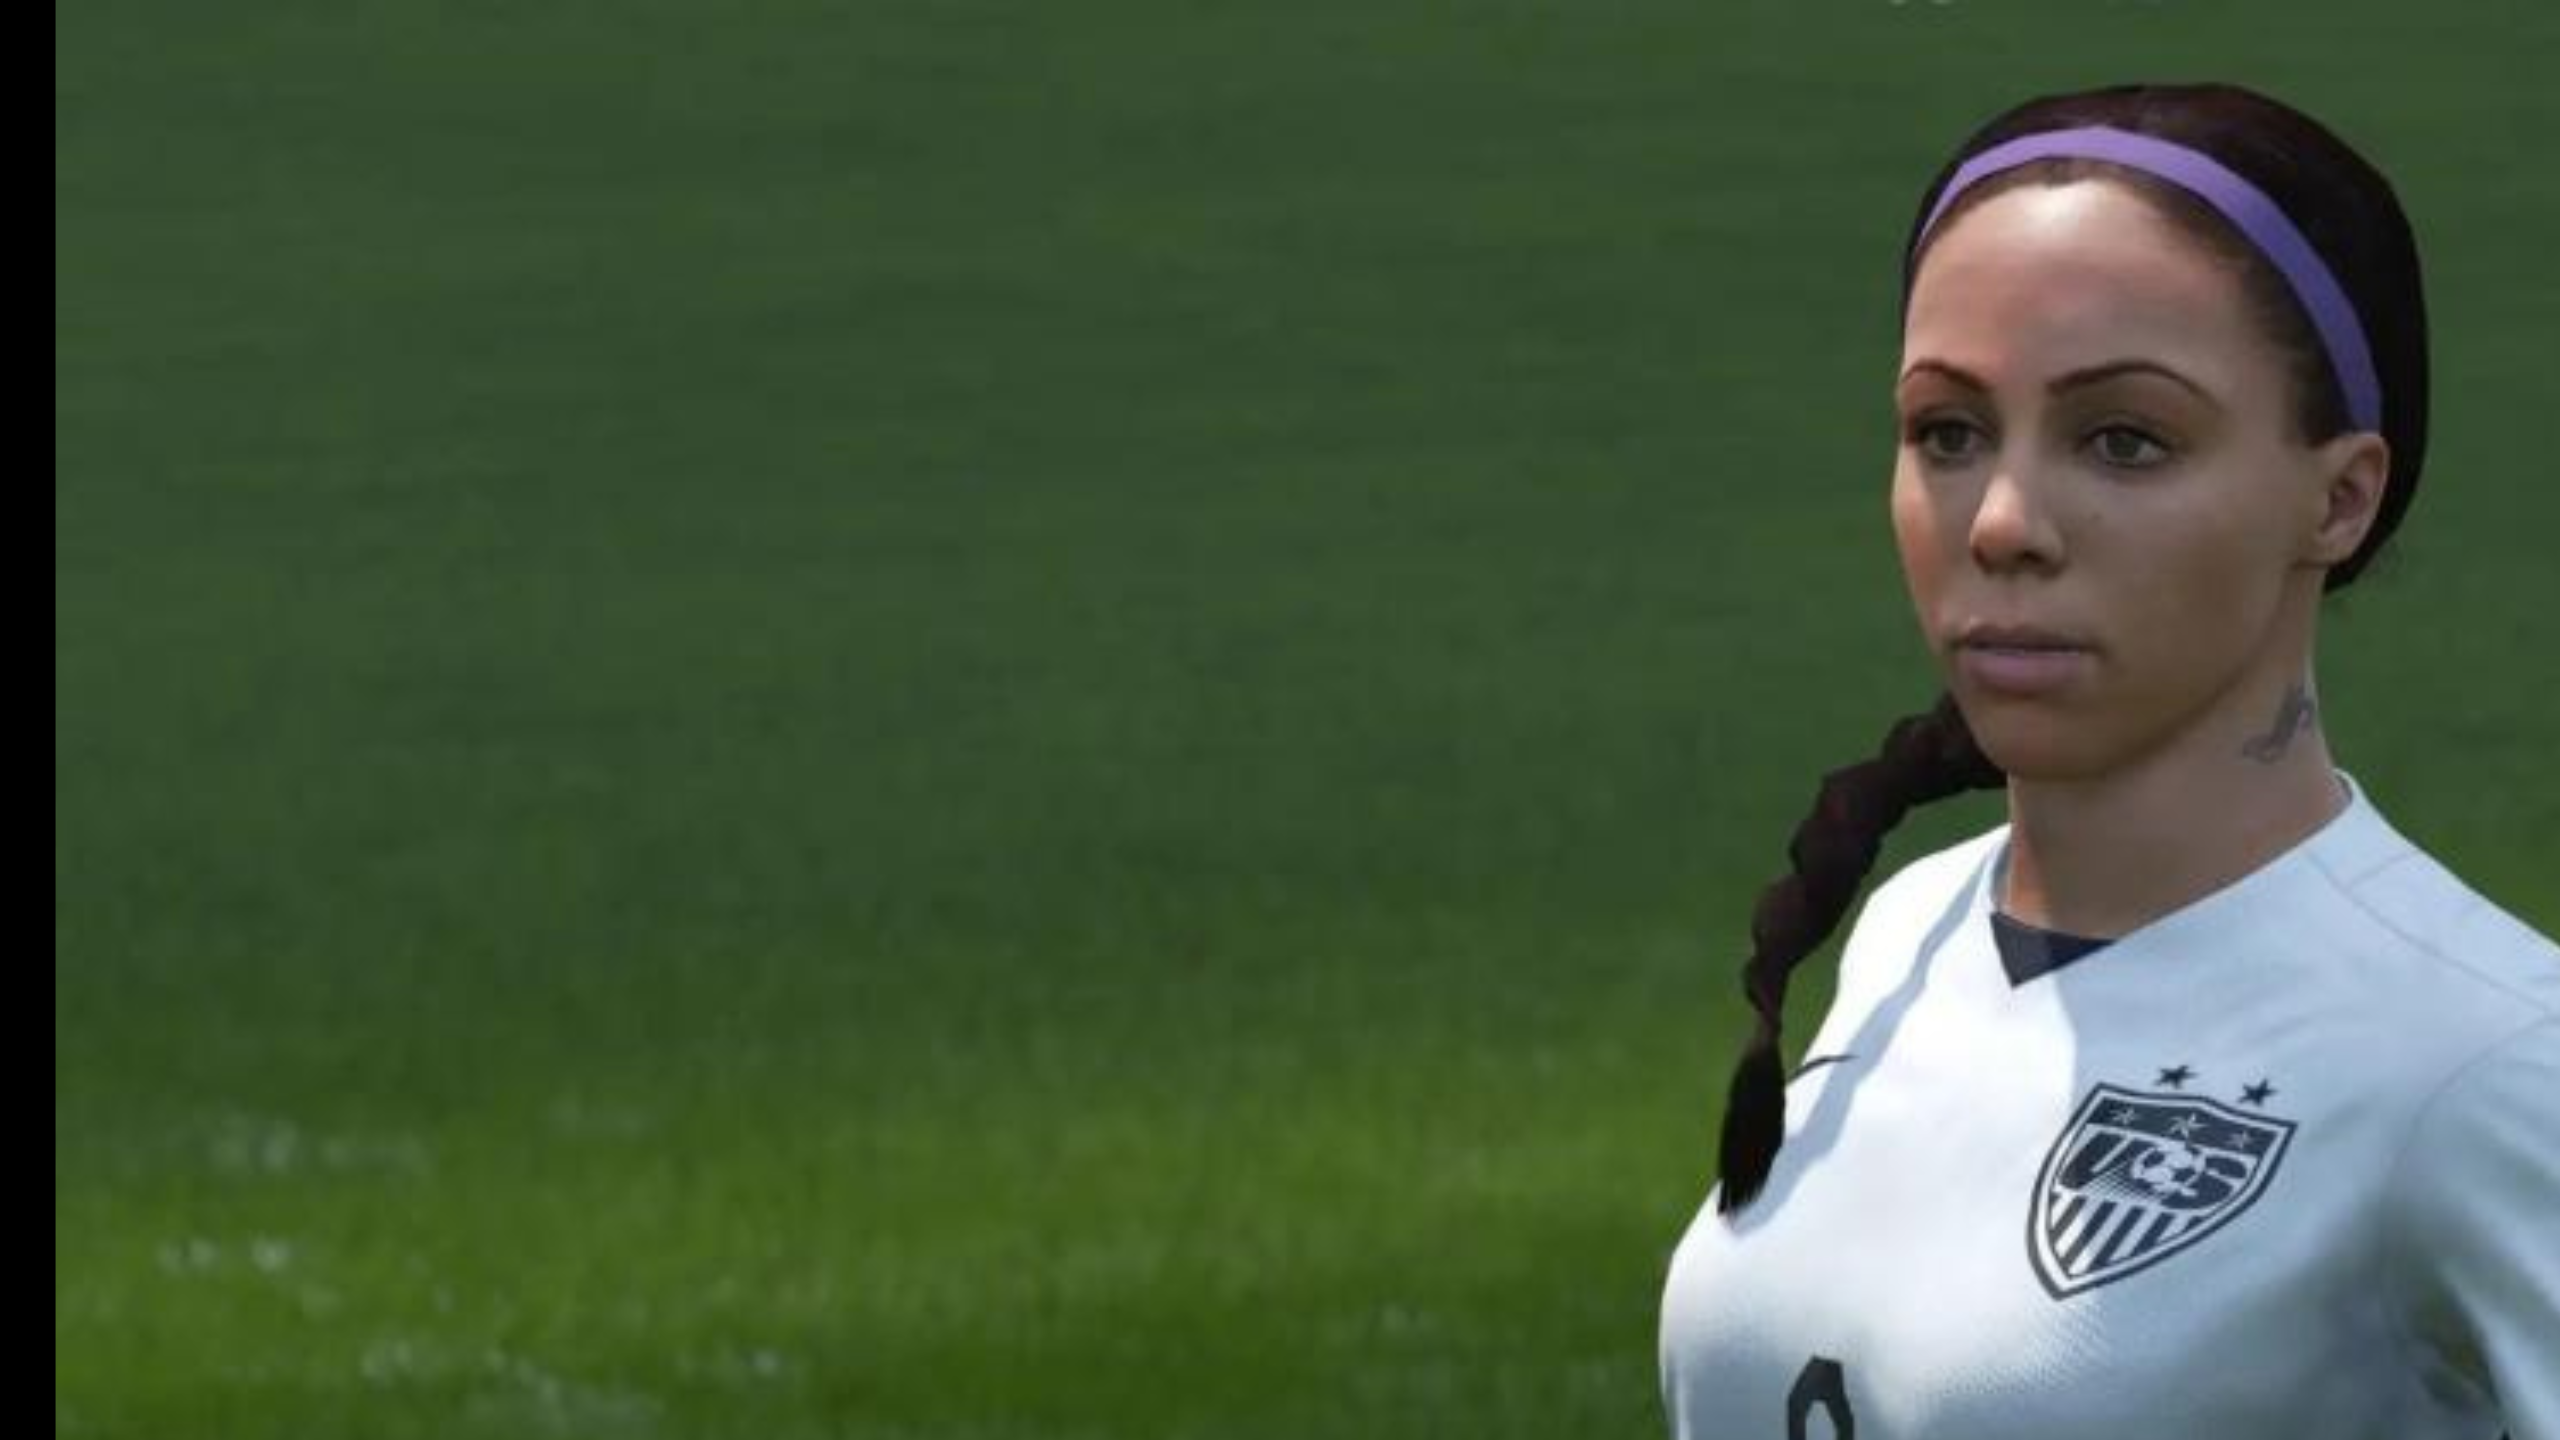 The profile of the athlete Sydney Leroux's avatar in FIFA is observed. She has a dark complexion and big brown eyes. Her brown hair of hers is tied up in a side braid. She wears a purple headband and a white undershirt, with big breasts. She has a tattoo on the right side of her neck.